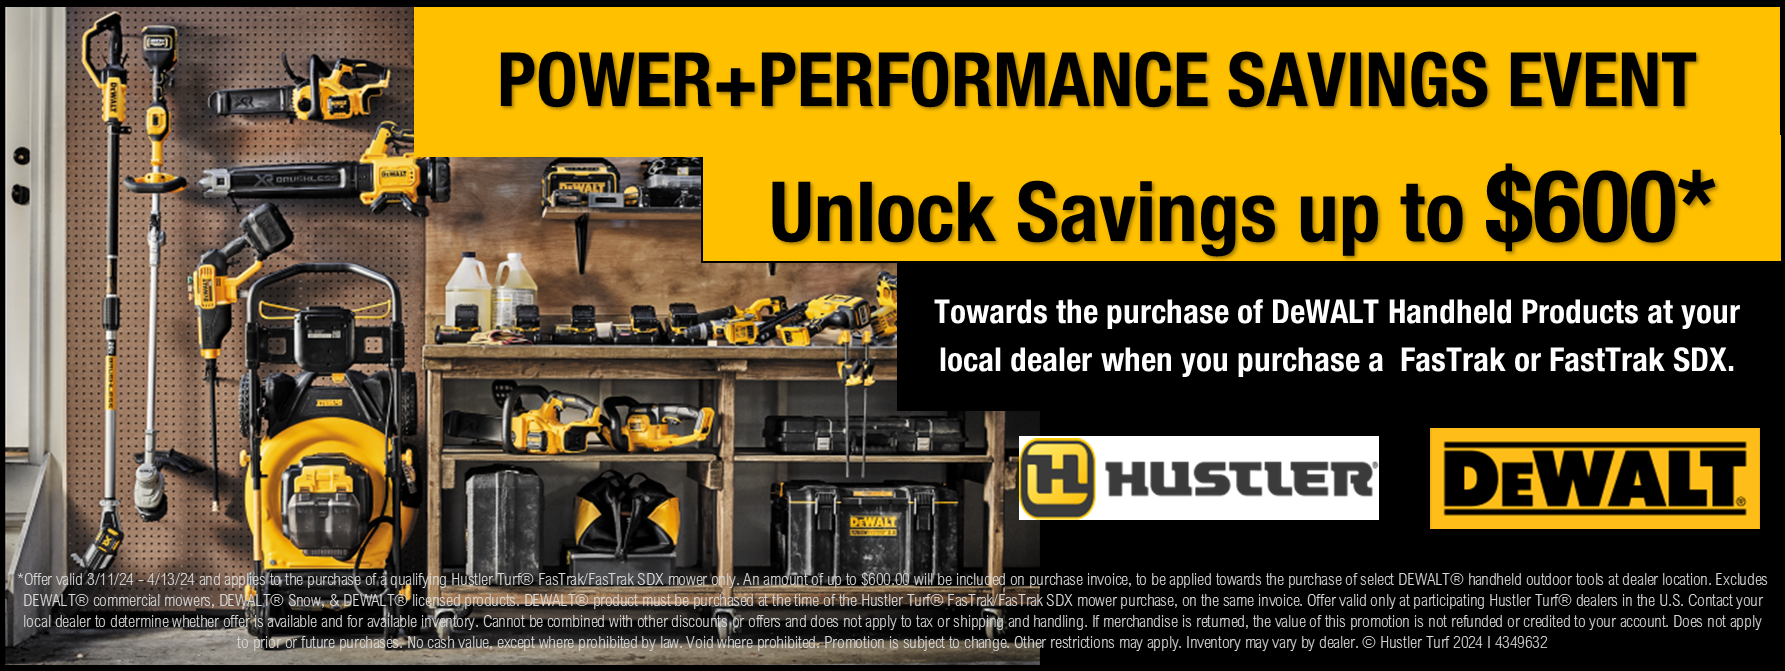 an advertisement for dewalt tools that says unlock savings up to $ 600